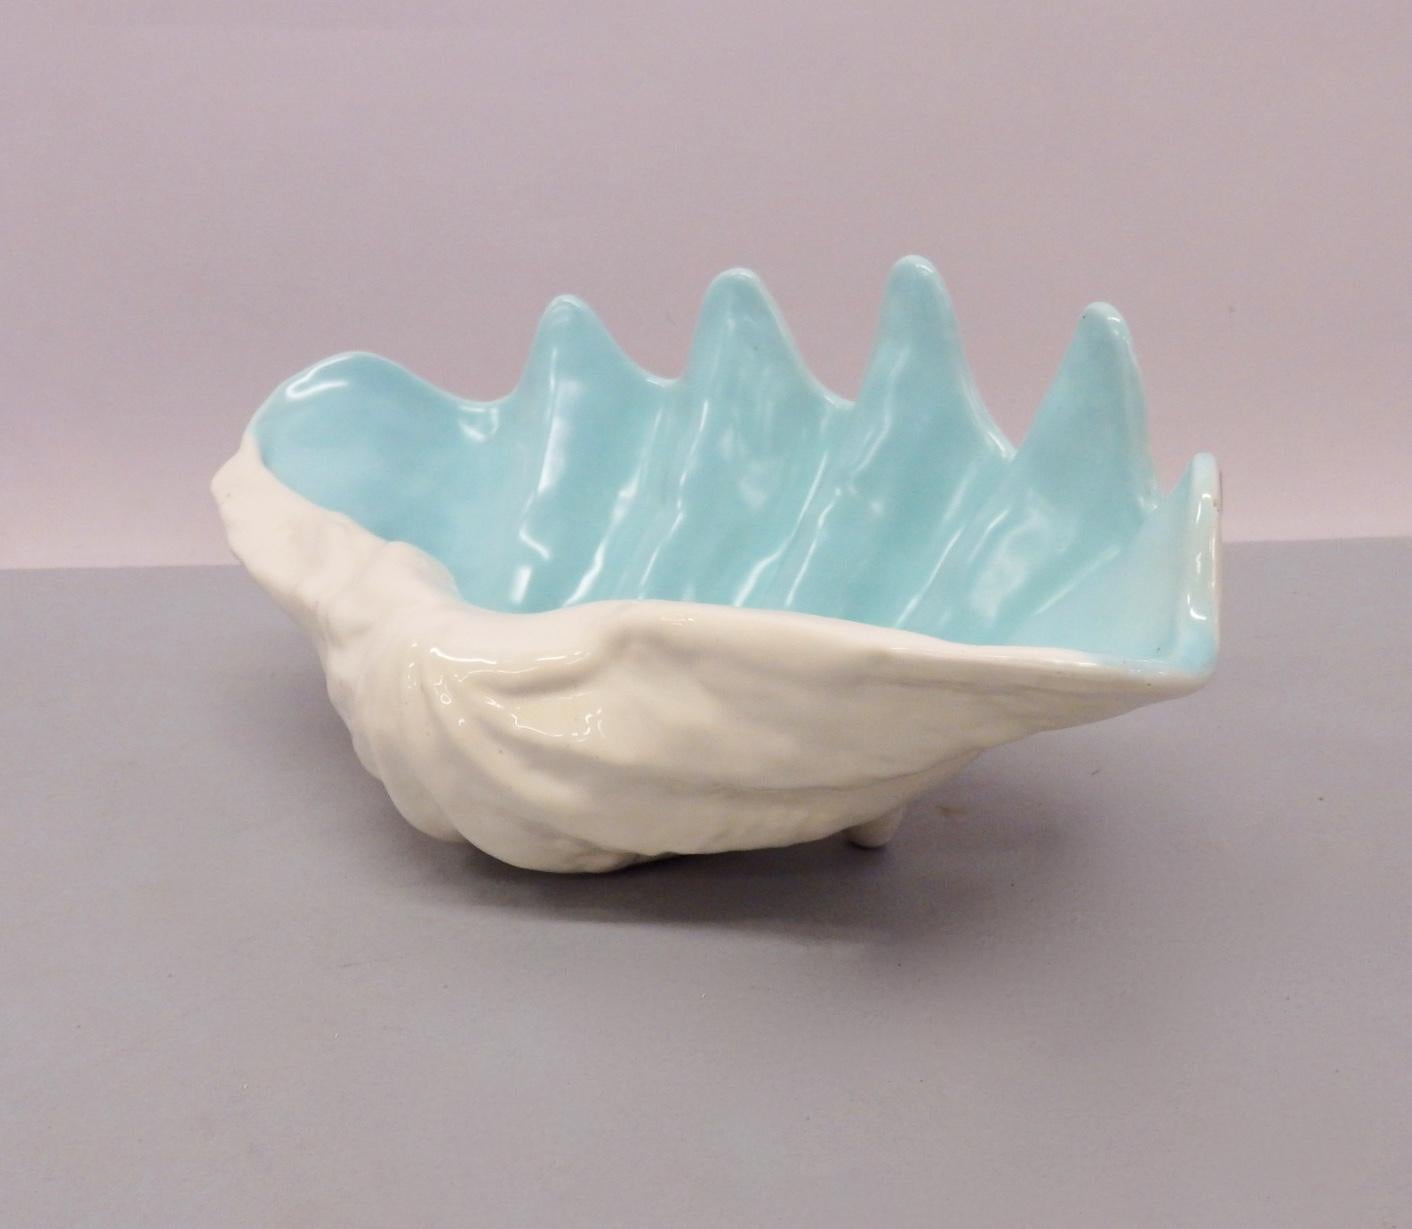 20th Century White with Turquoise Interior Sea Shell Bowl or Vase